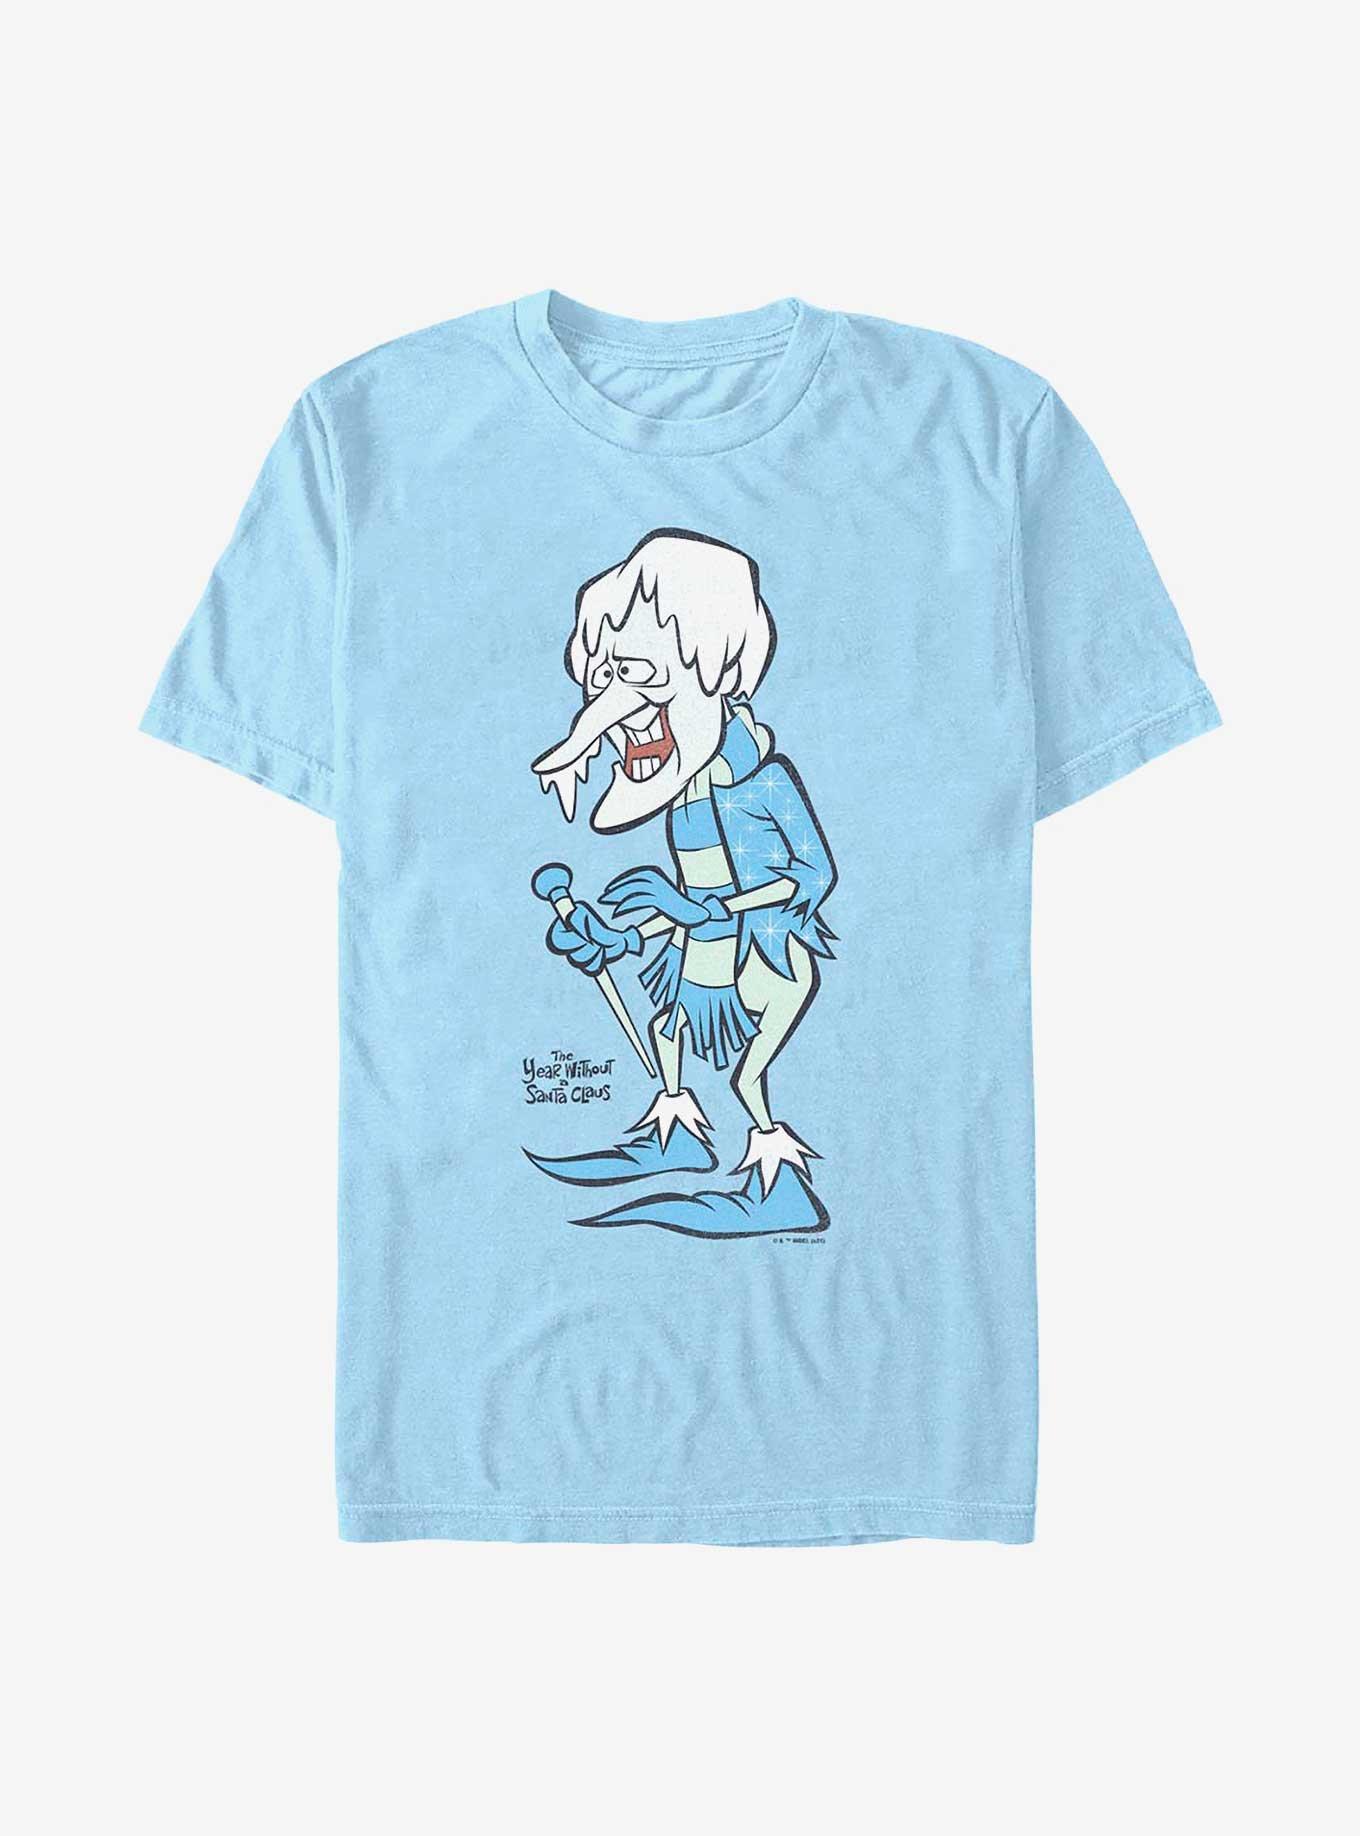 Snow Miser And Heat Miser Are Too Much Tank Top - Maxxtees